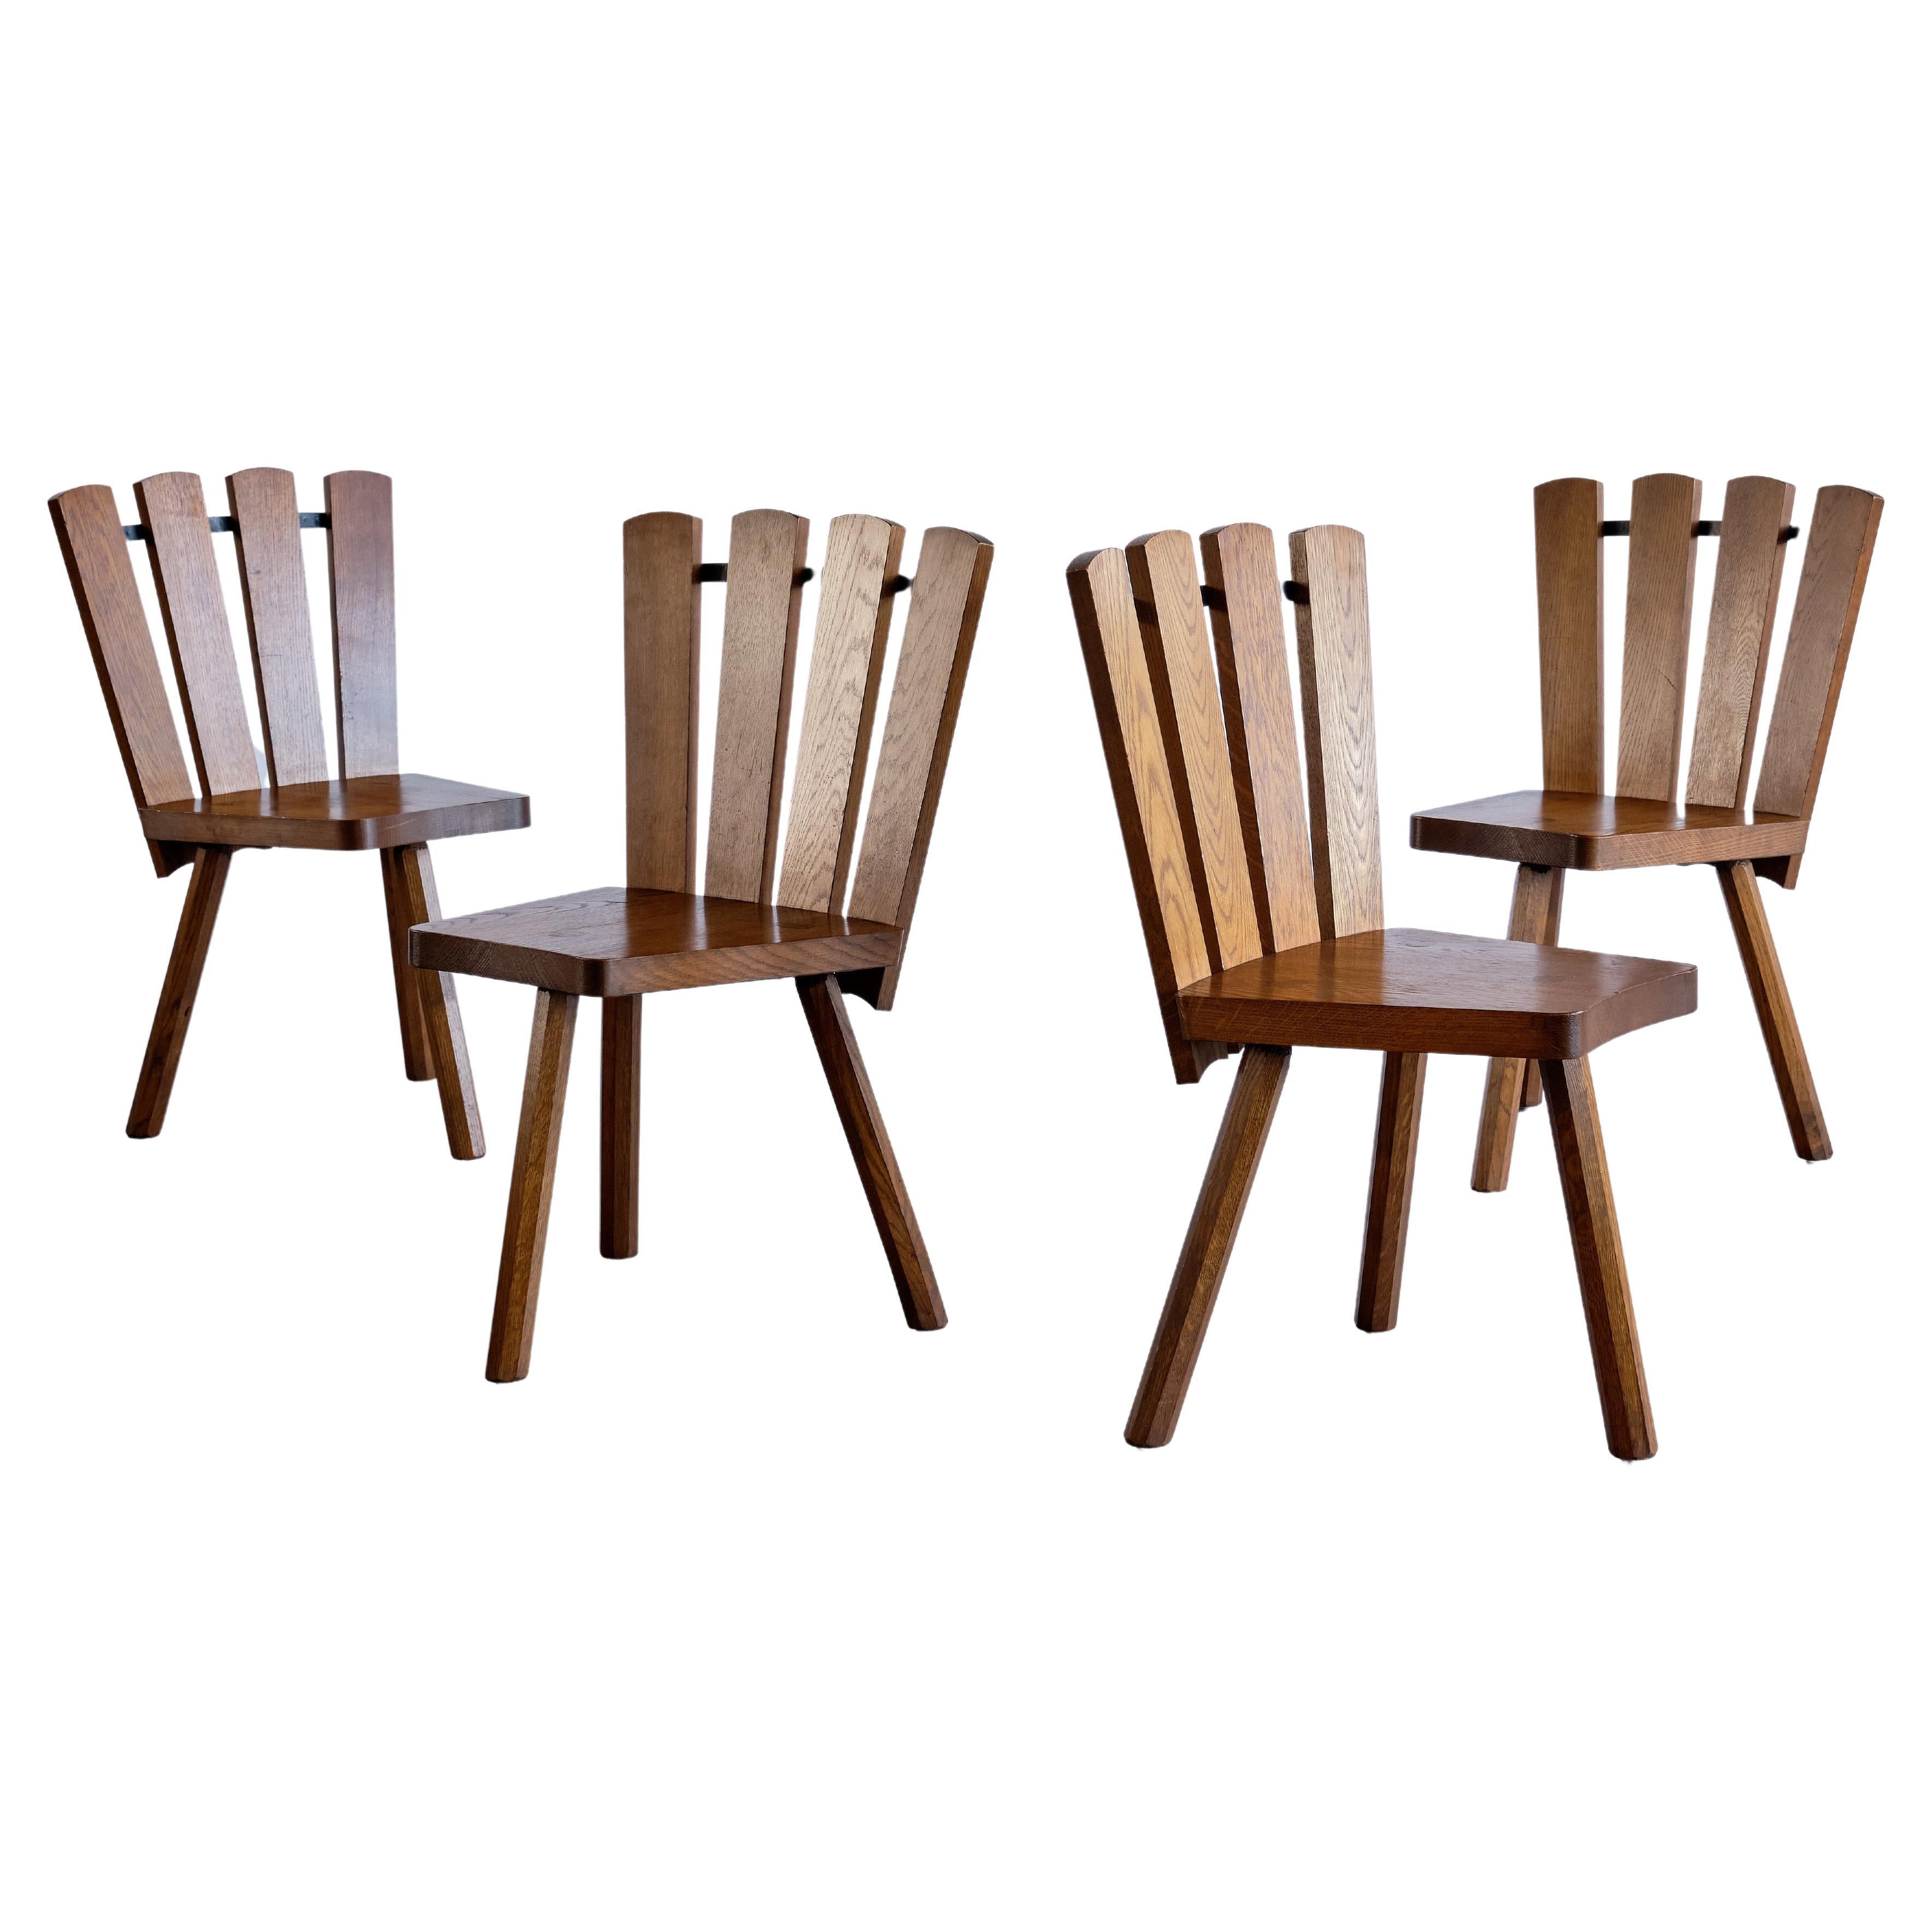 Set of Four French Modern Tripod Oak Dining Chairs with Fan Shaped Back, 1950s